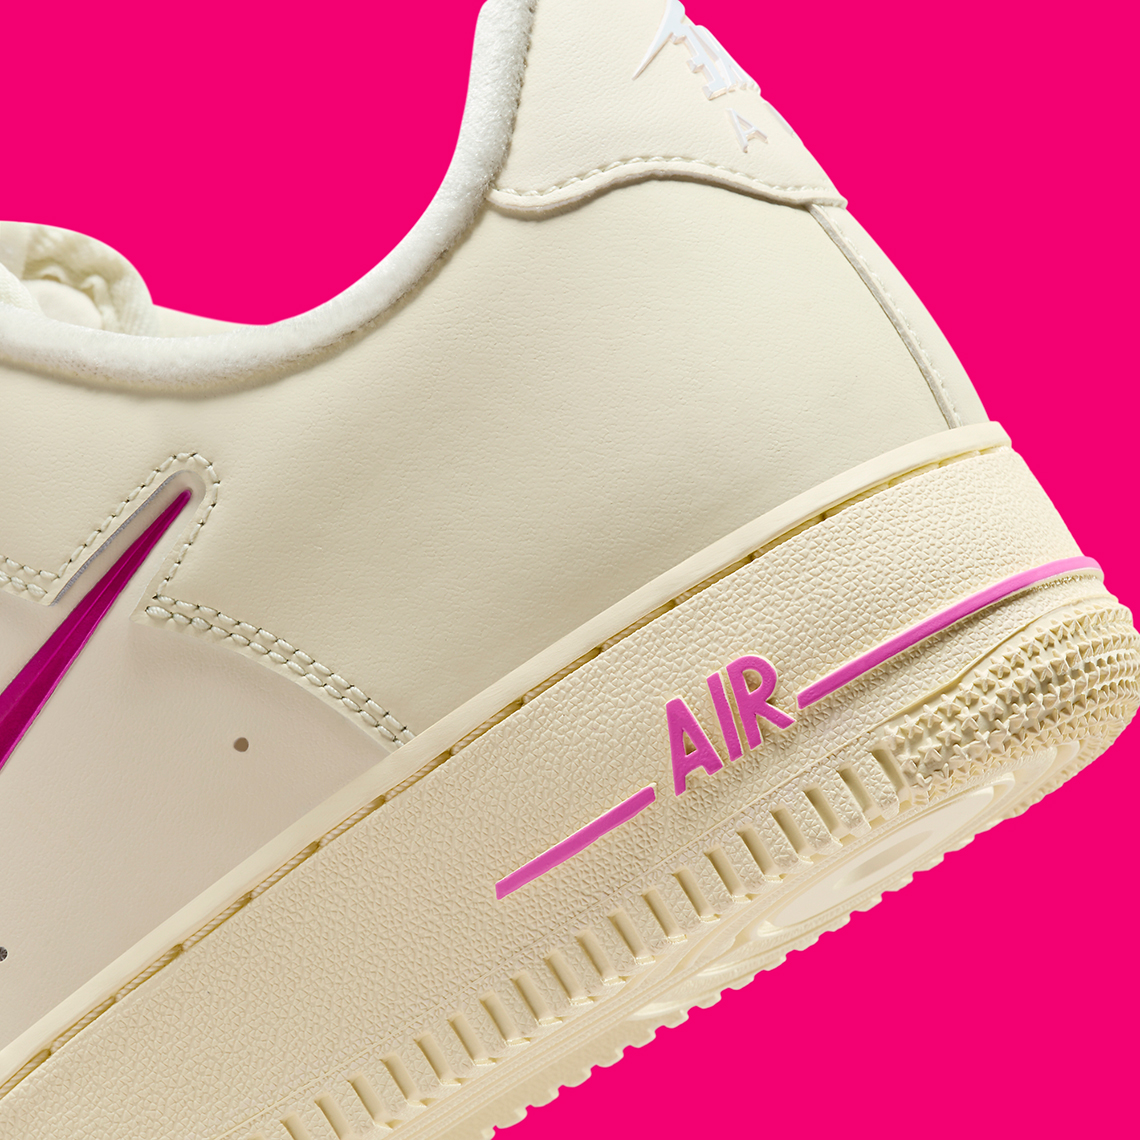 Nike Air Force 1 Low Just Do It Coconut Milk Playful Pink Alabaster Fb8251 101 5